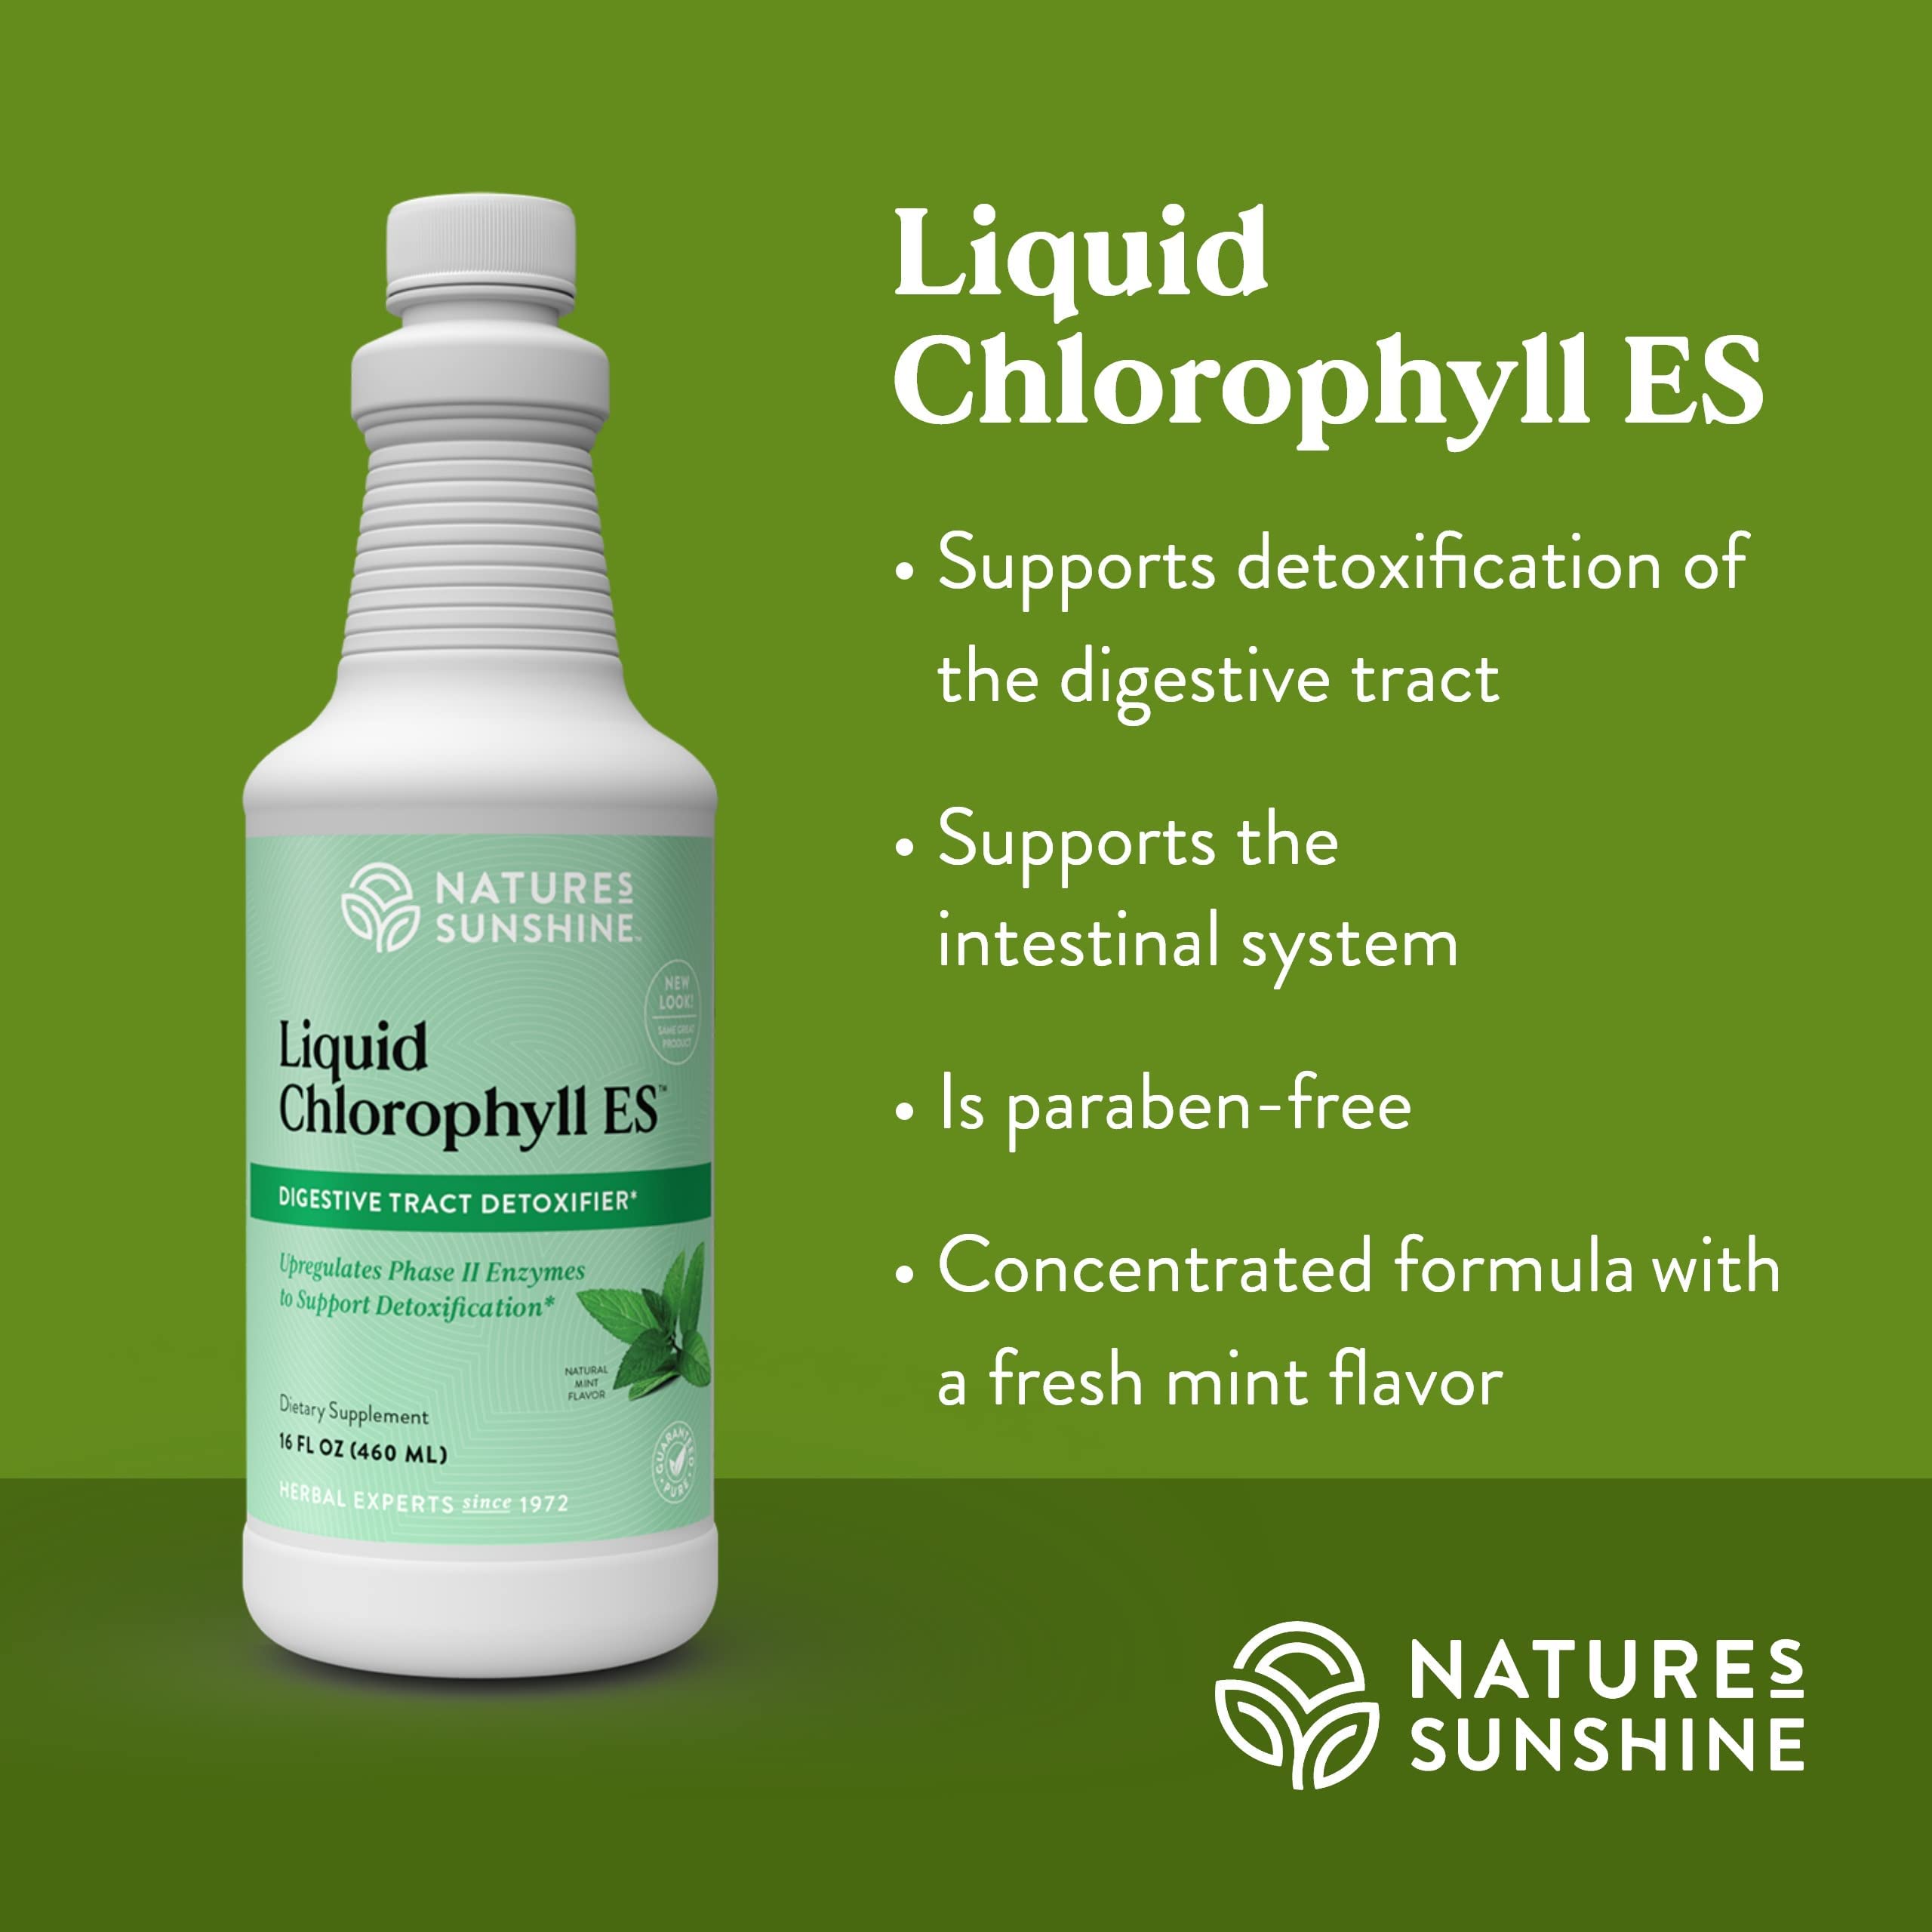 Nature's Sunshine Liquid Chlorophyll Extra Strength - Immunity Support, Detox & Cleanse, Chlorophyll Liquid Drops with Spearmint Oil, Natural Energy Boost, Internal Deodorant - 16 Fl Oz